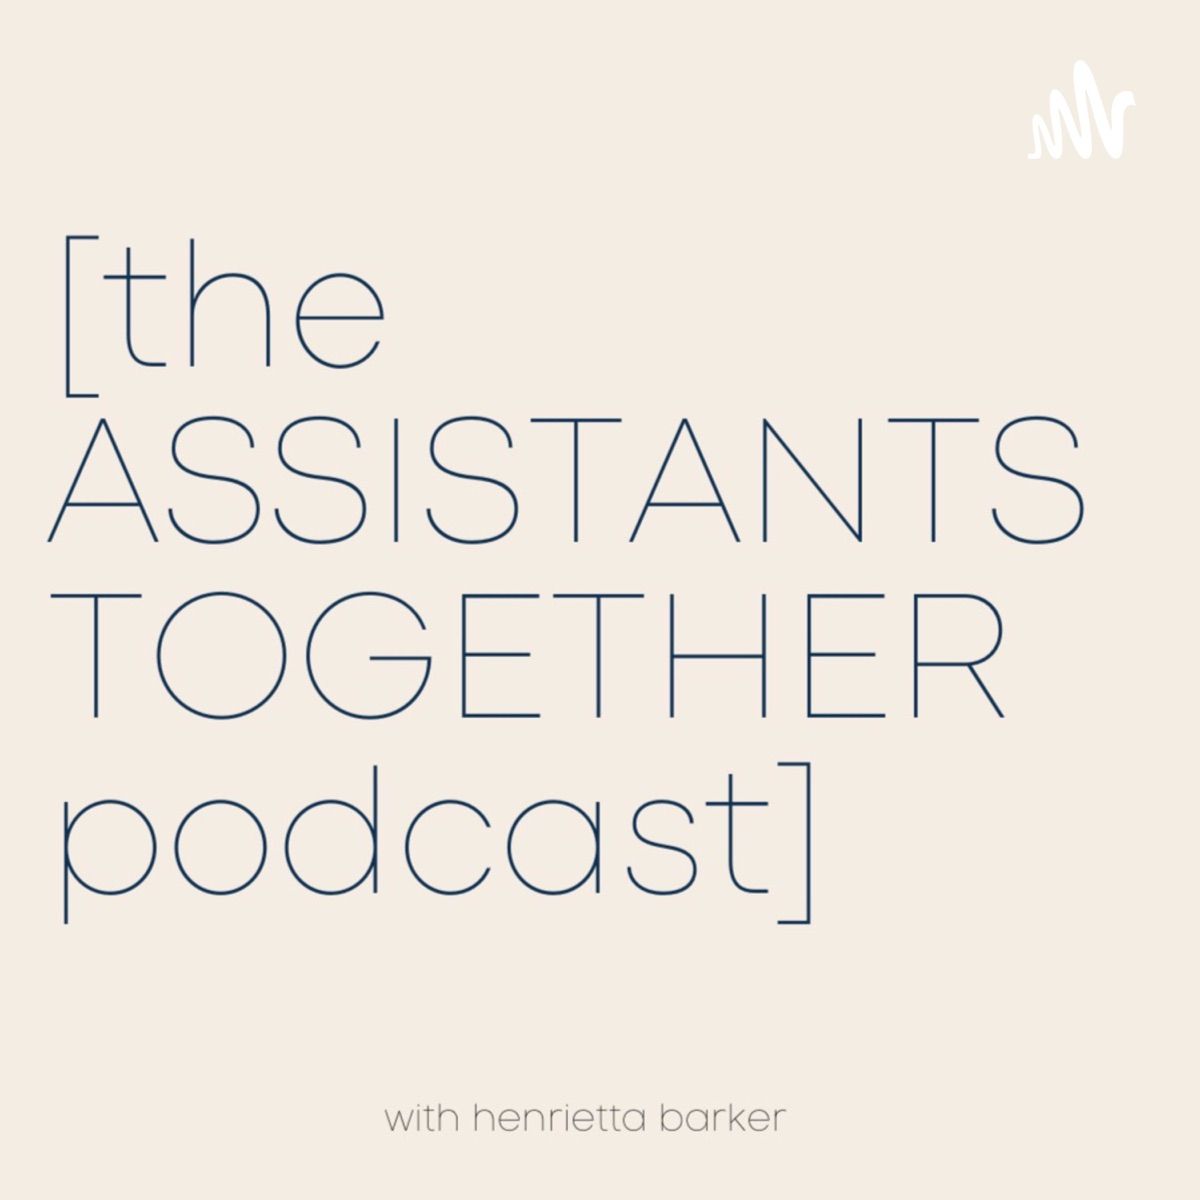 Lauren Bradley on Assistants Together Podcast - The Assistant & Executive Paradox